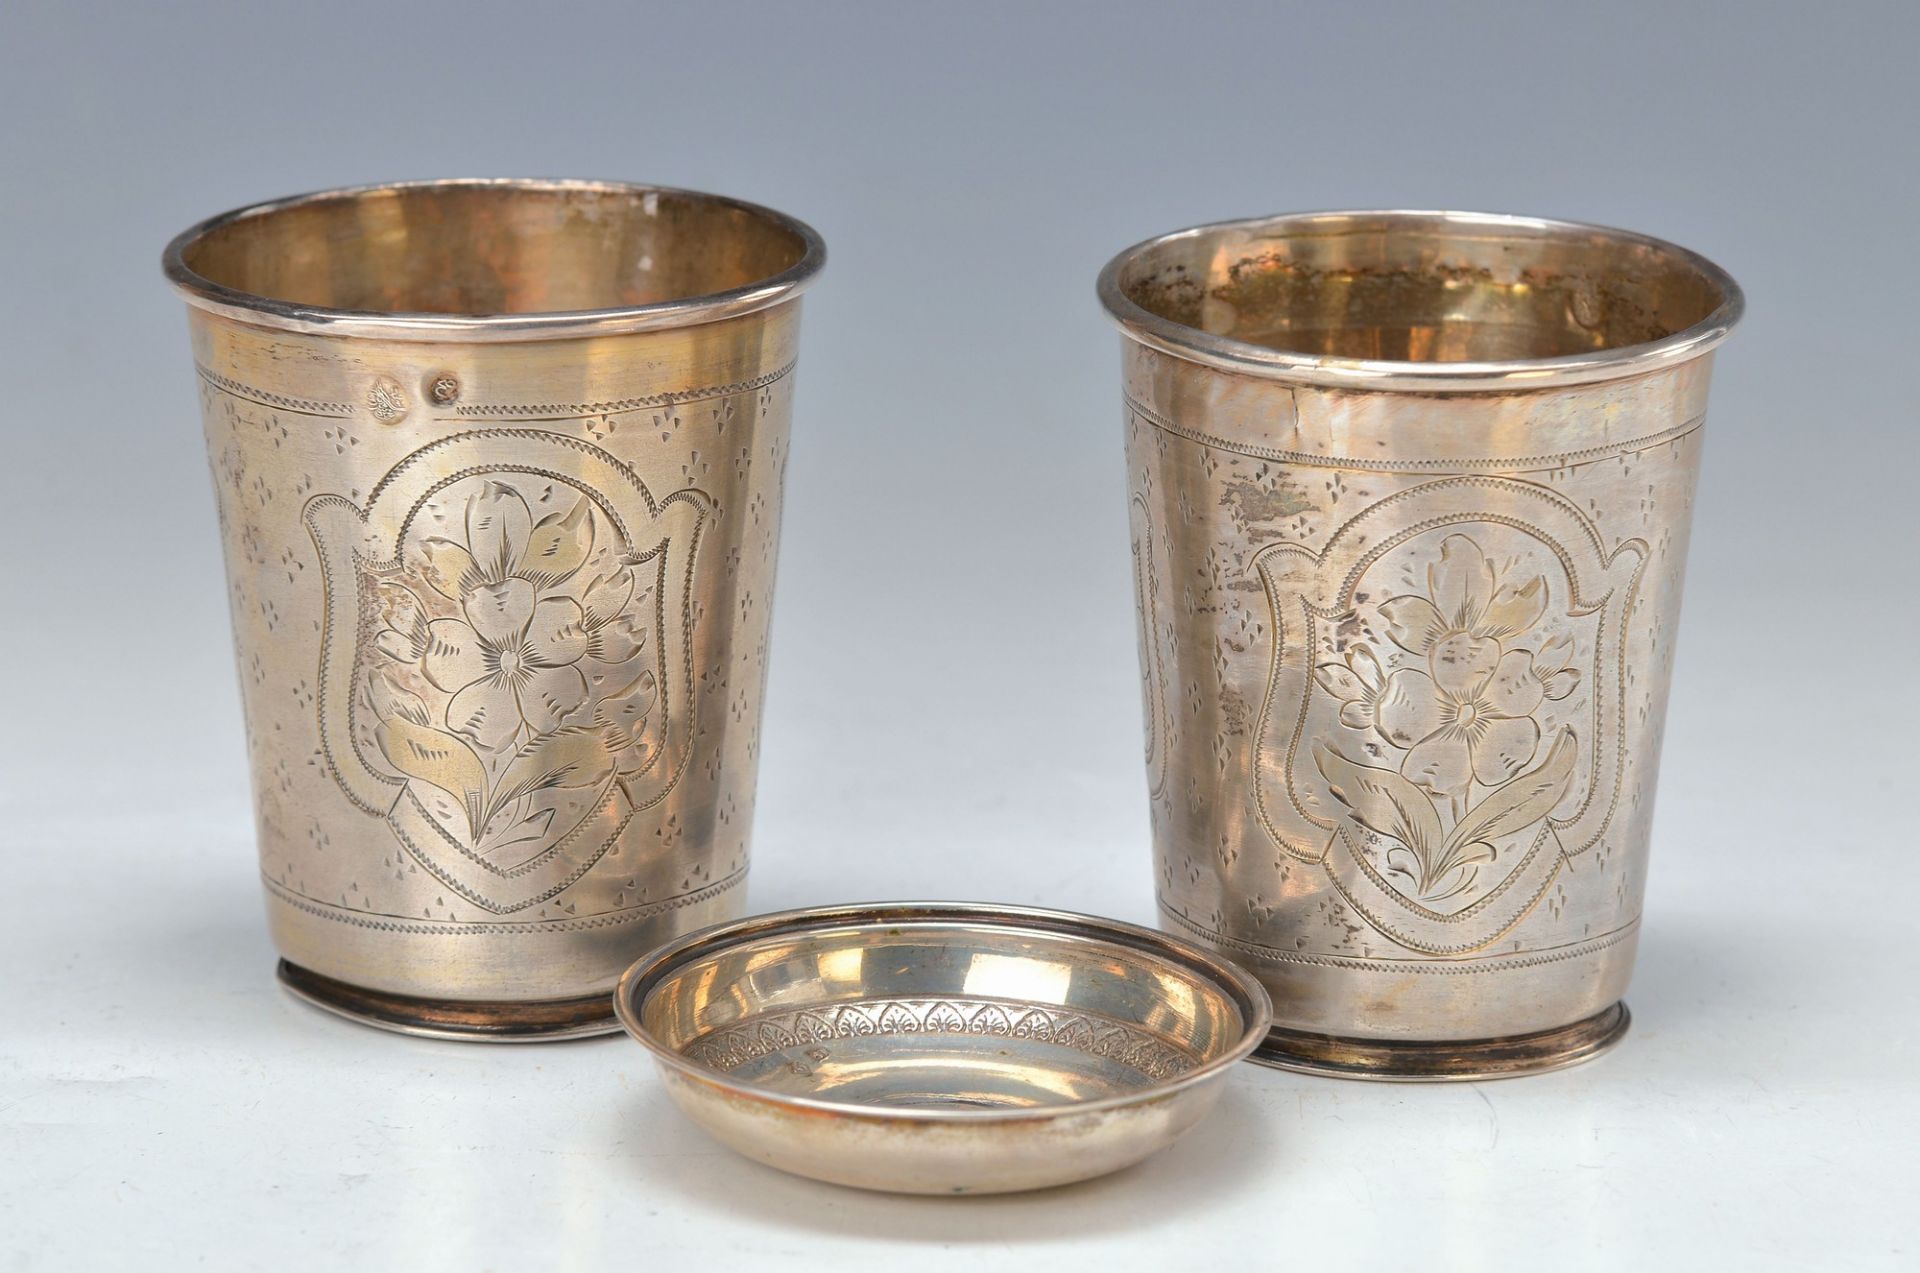 couple of beakers and small bowls, probably Turkey, 19th c., silver driven and enchased, floral